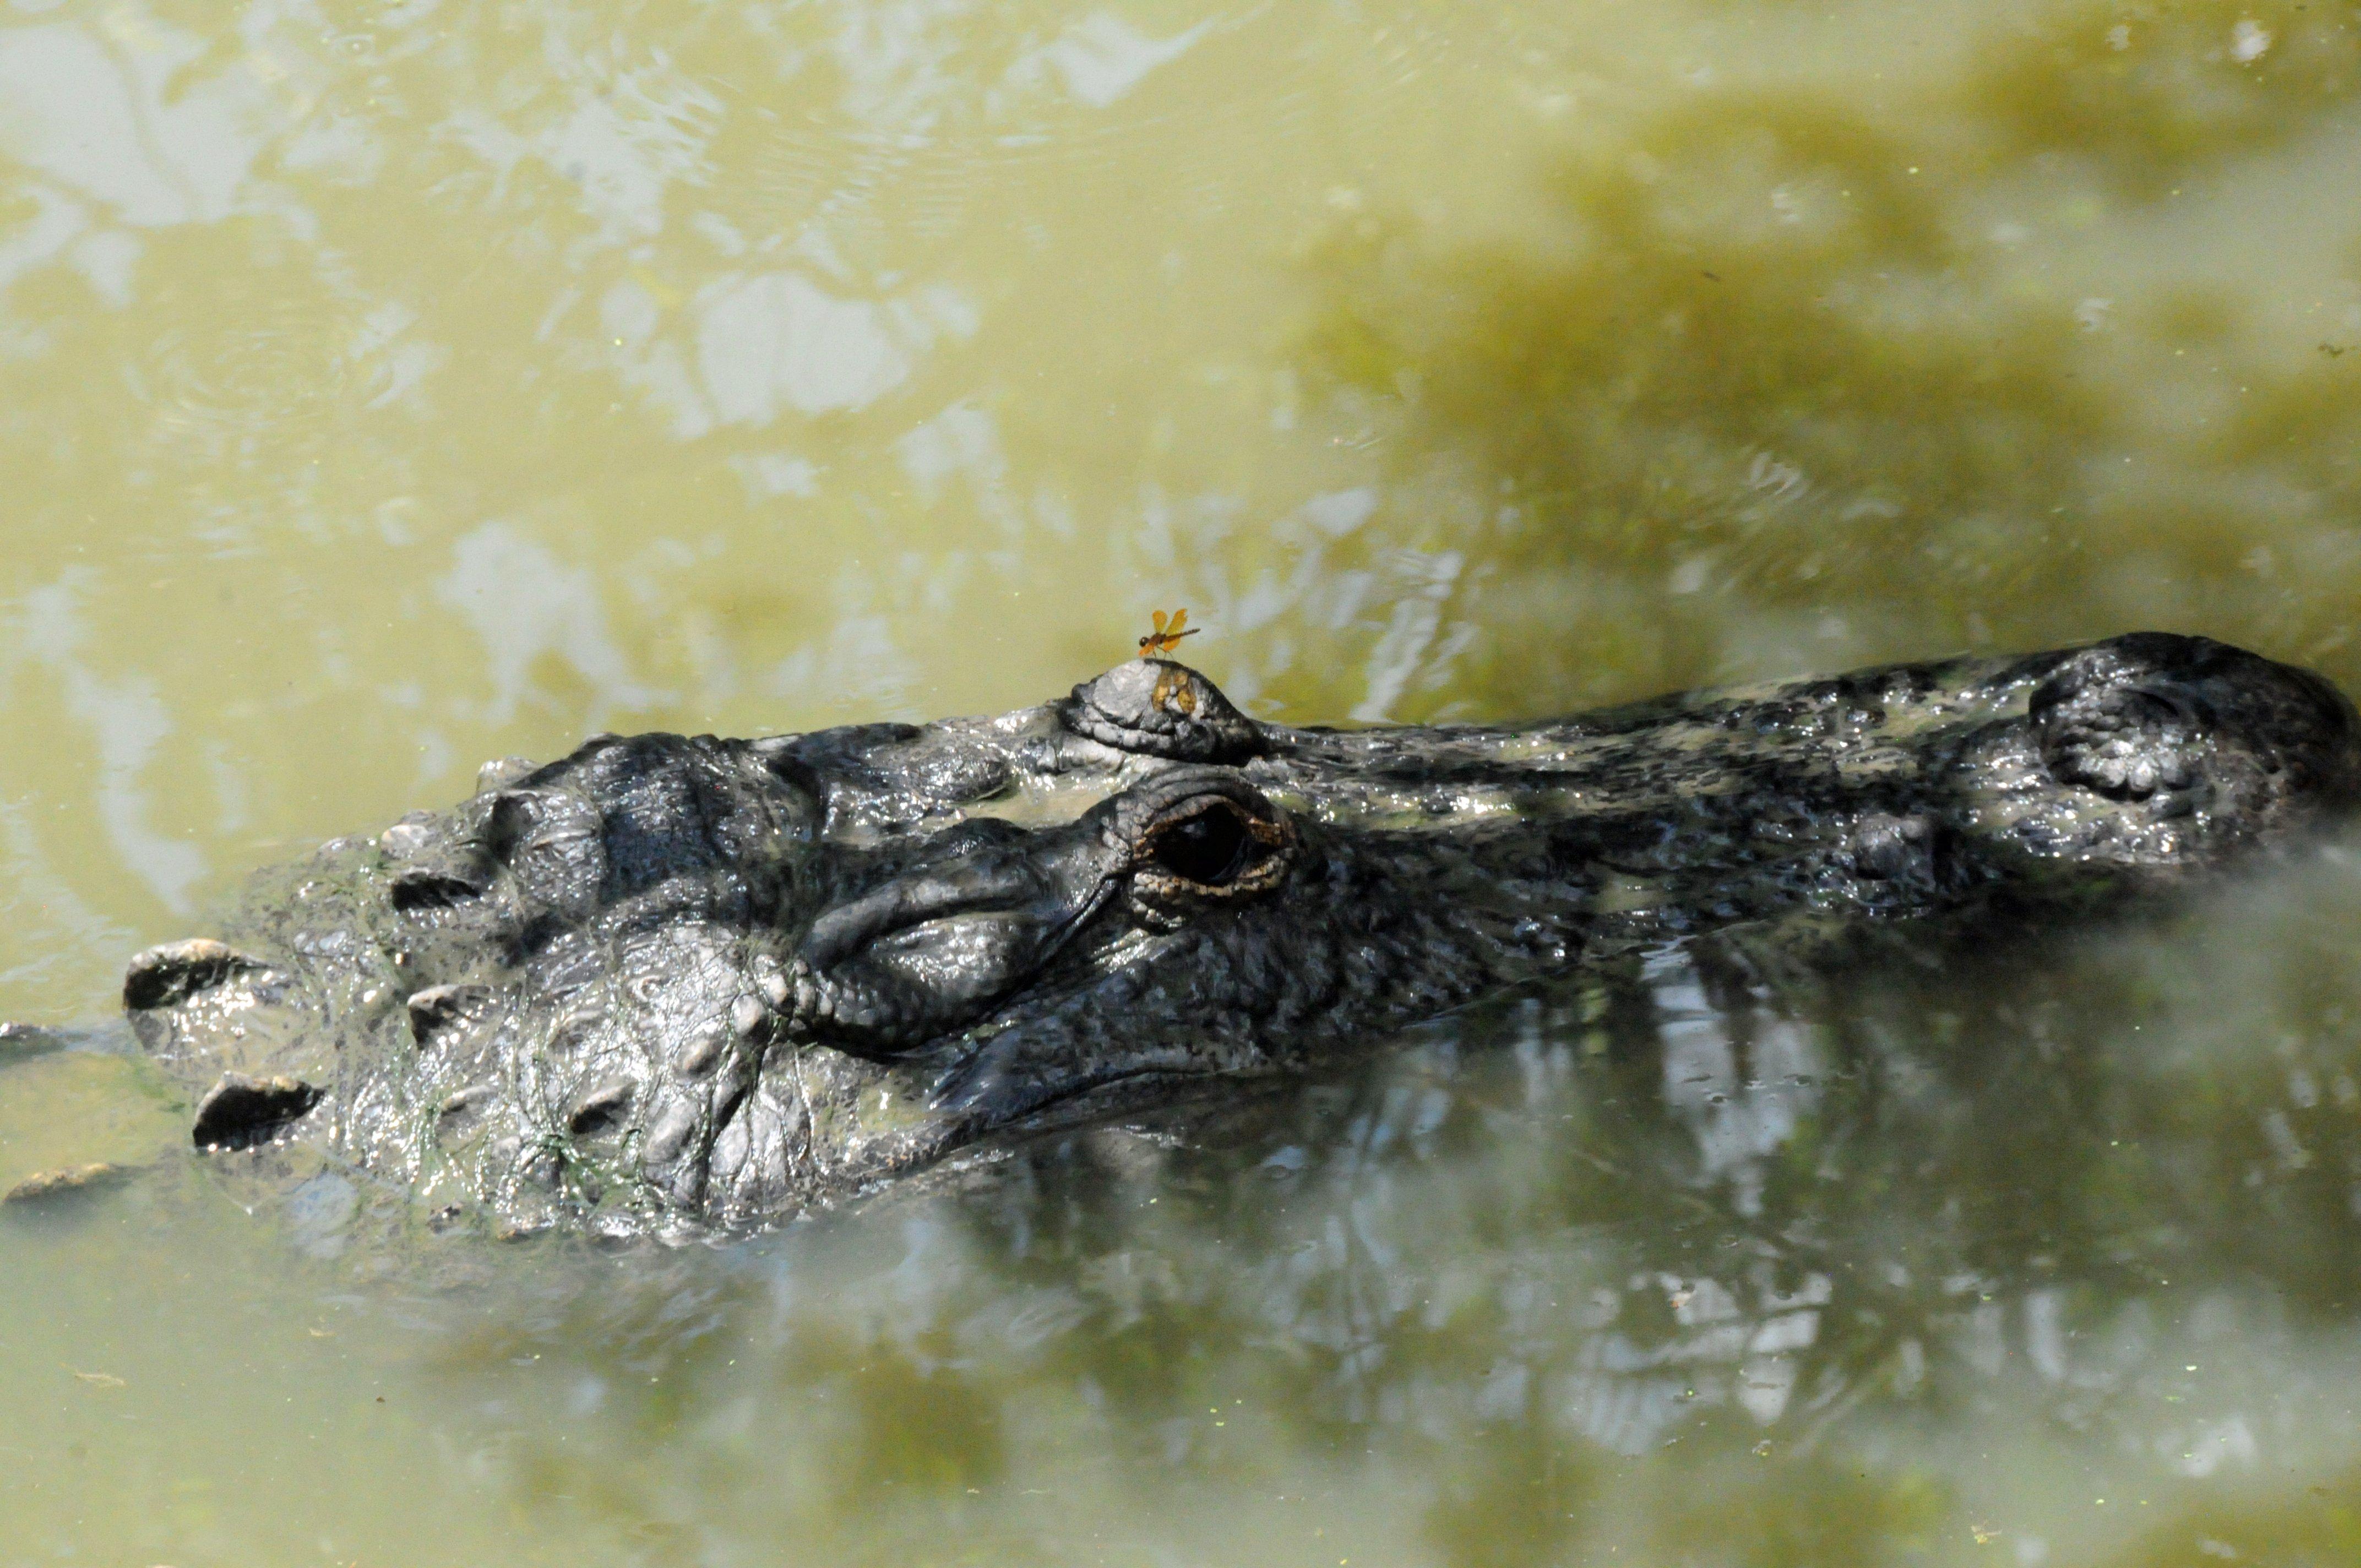 South Carolina has seen multiple fatal gator attacks in recent years. (Image by Stephanie Mallory)